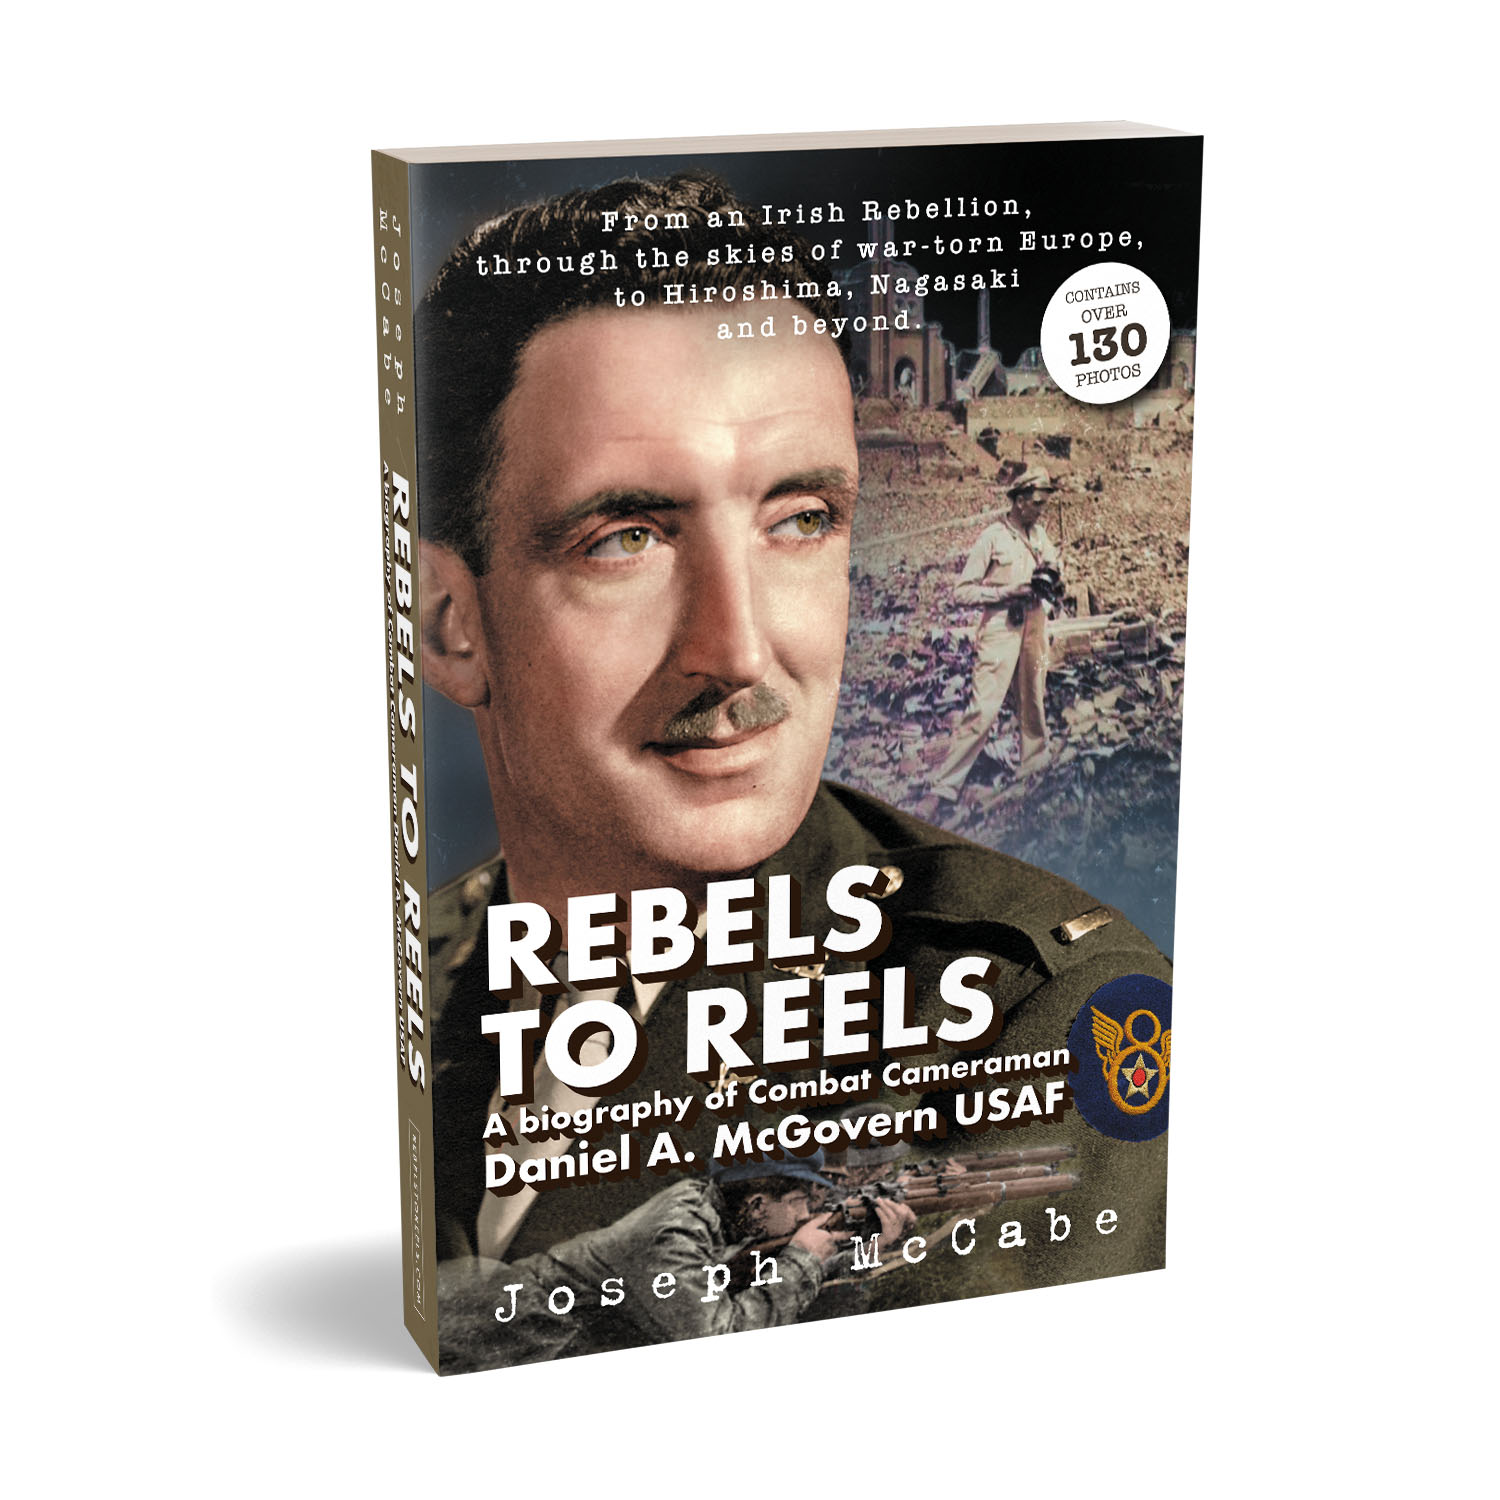 'Rebels to Reels' is the incredible, historic true-life story of combat cameraman Lt Col. Daniel A. McGovern USAF. The author is Joe McCabe. The book cover was designed by Mark Thomas of coverness.com. To find out more about my book design services, please visit www.coverness.com